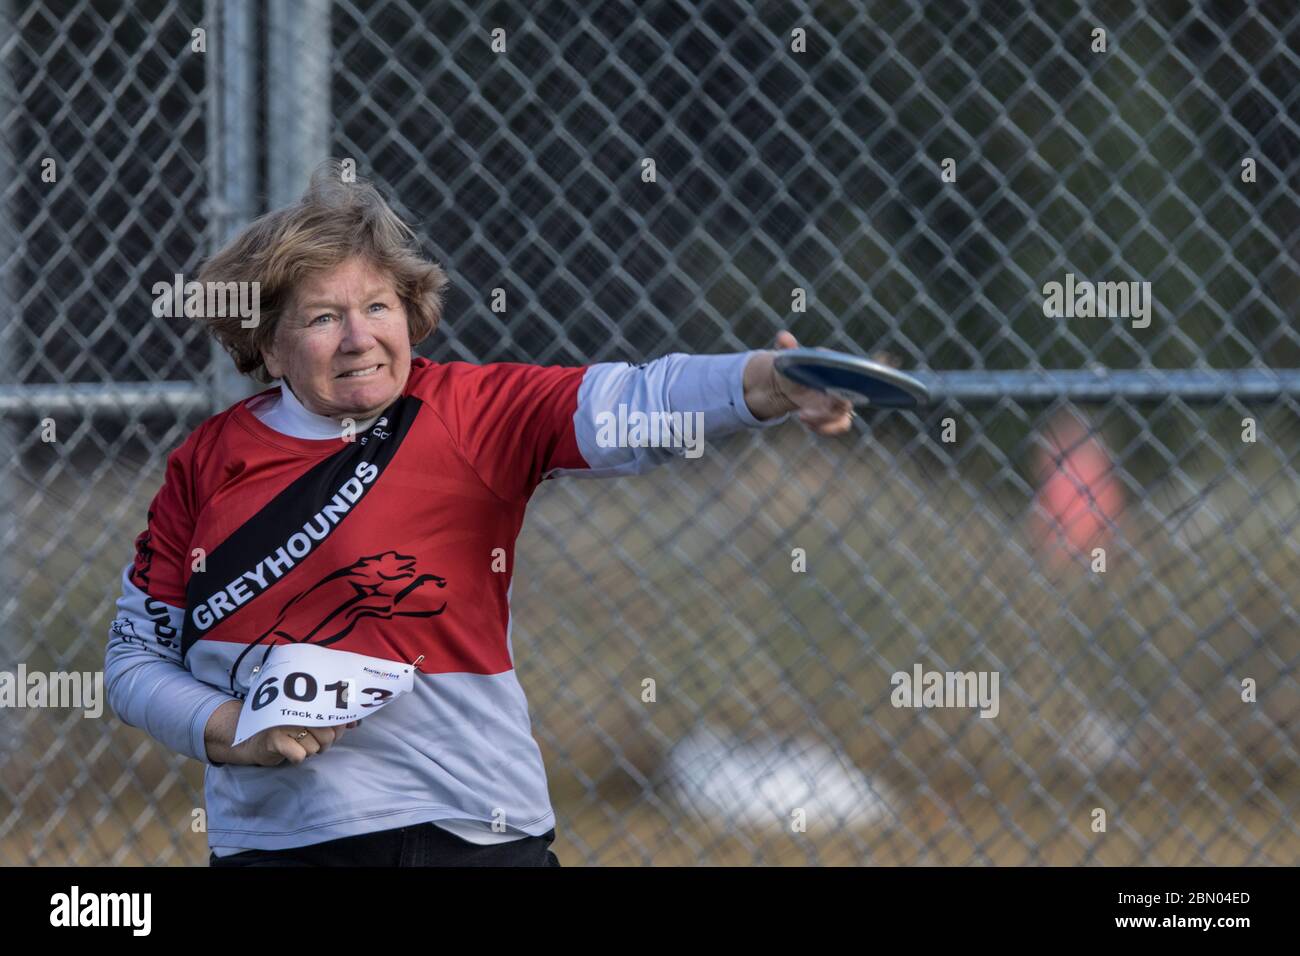 Senior Ladies Discus Throw competition. 60 year old age group, jusr releasing Stock Photo